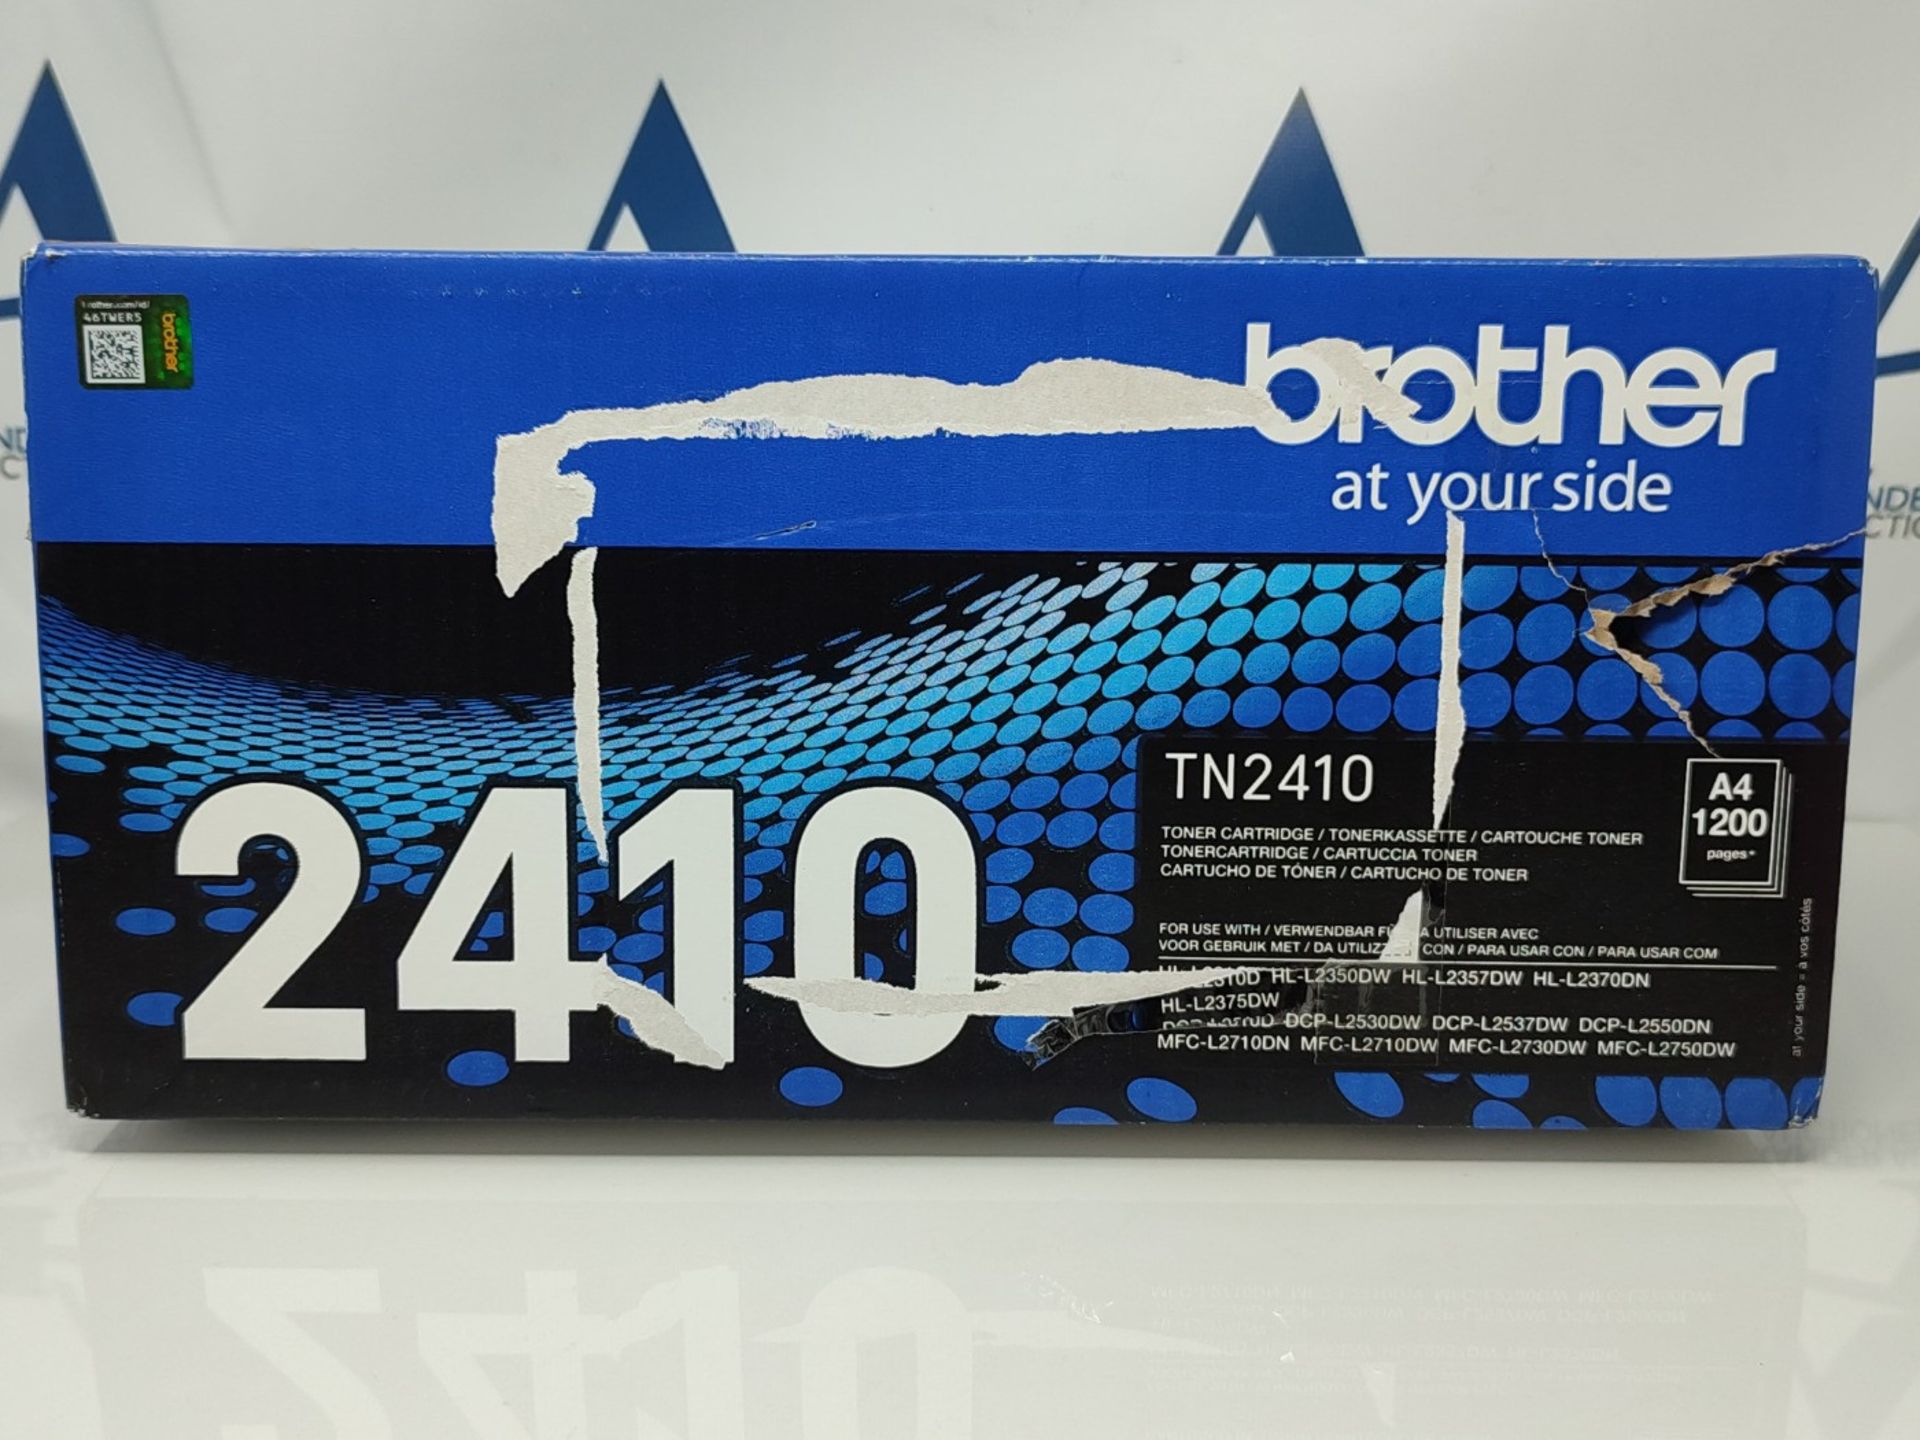 Brother TN-2410 Toner Cartridge, Black, Single Pack, Standard Yield, Includes 1 x Tone - Image 2 of 3